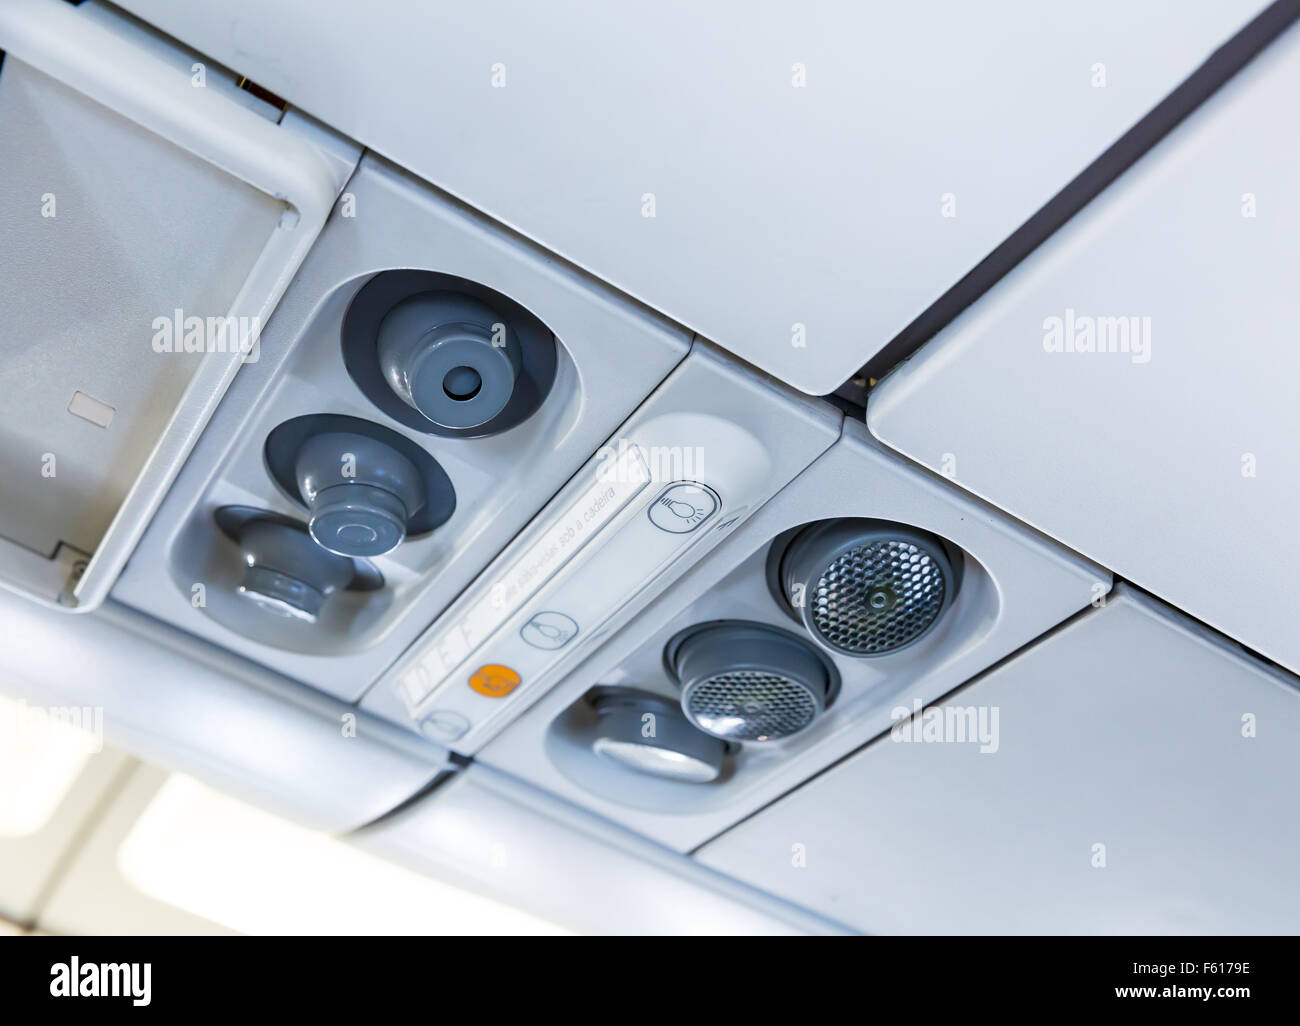 Light and air system in the plane close up Stock Photo